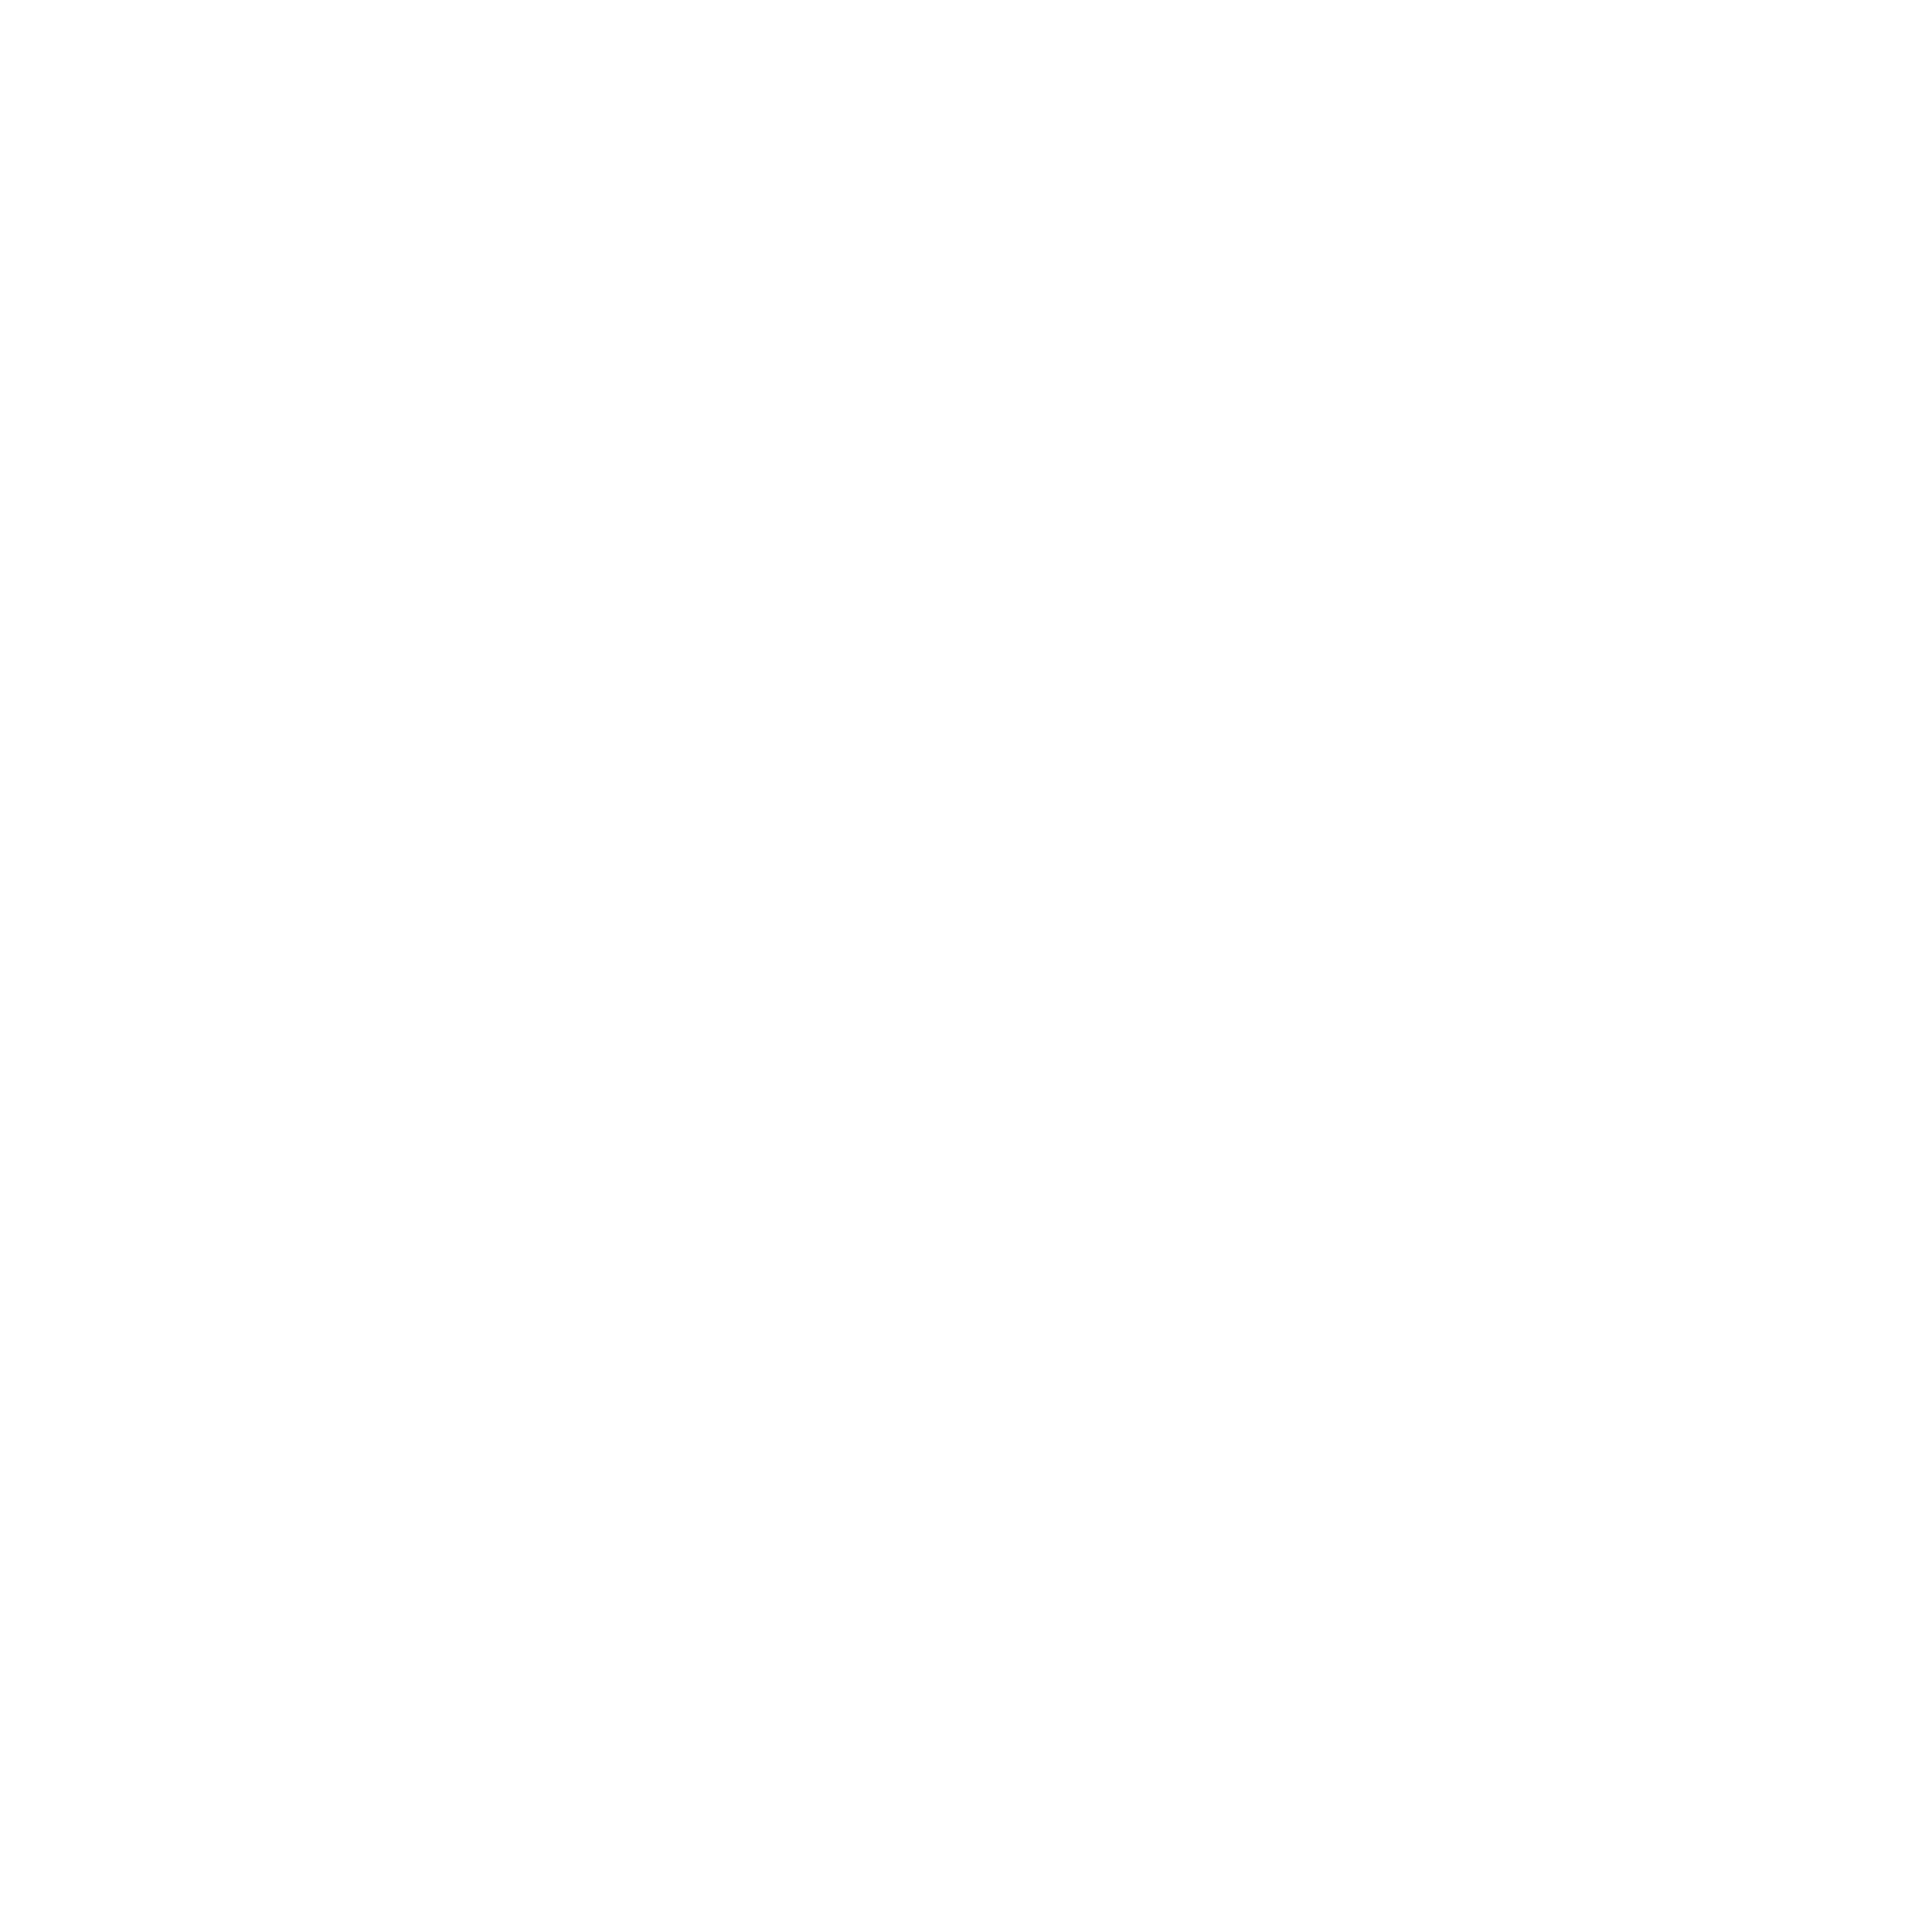 AT&T Globe Logo - The Sign | An AT&T Original Documentary on AUDIENCE Network